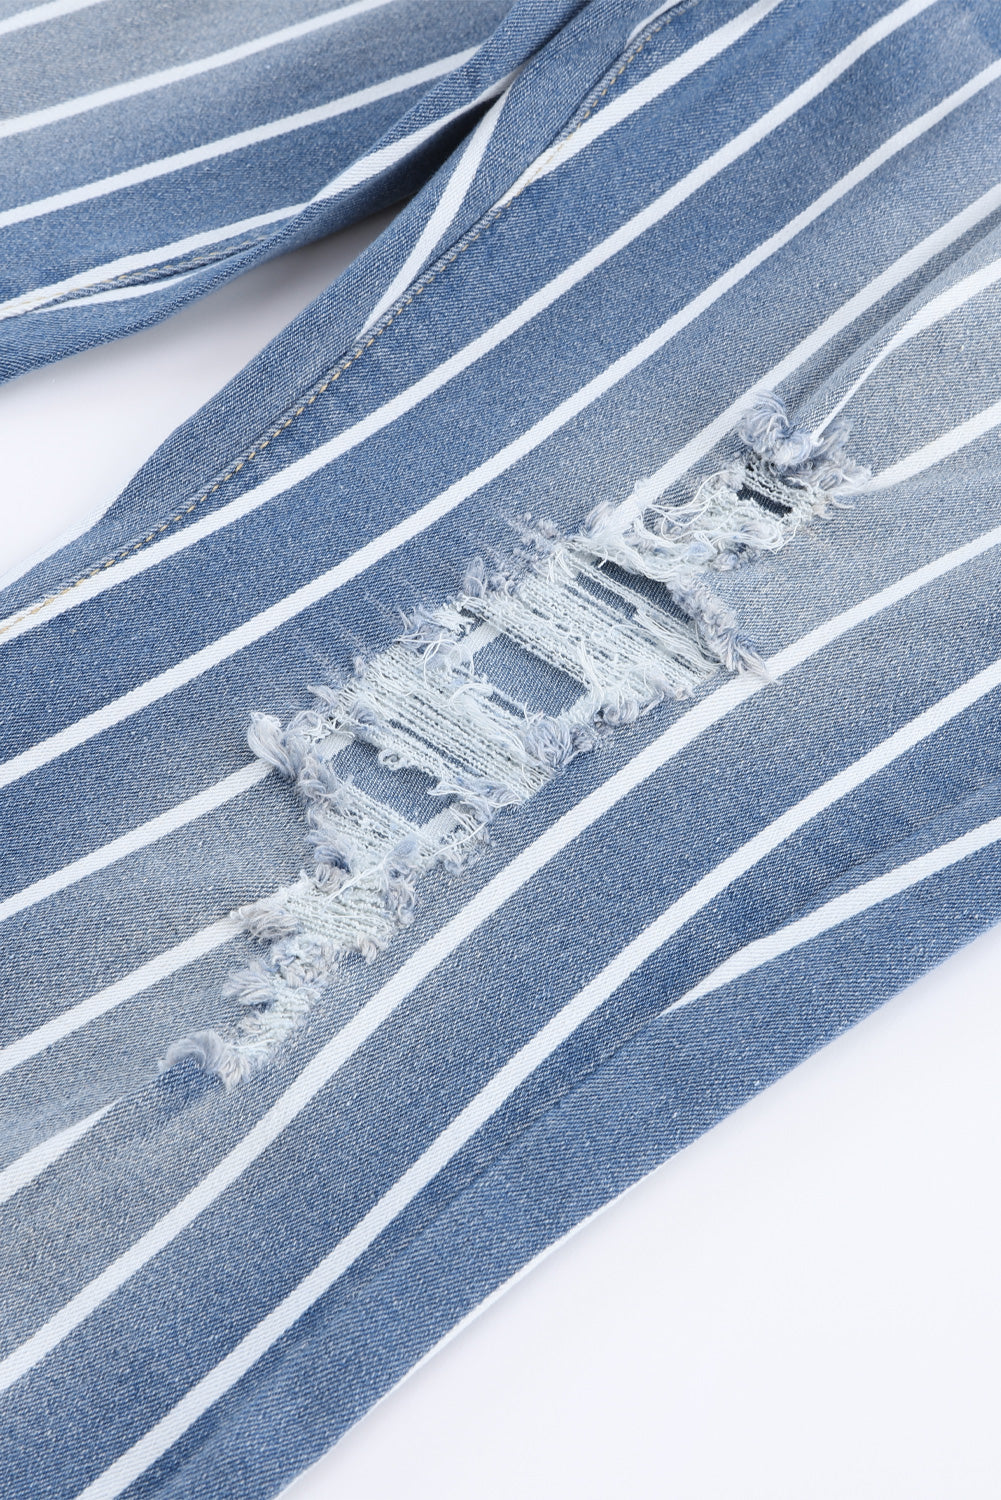 Sky Blue Vertical Striped Ripped Flare Jeans - SELFTRITSS